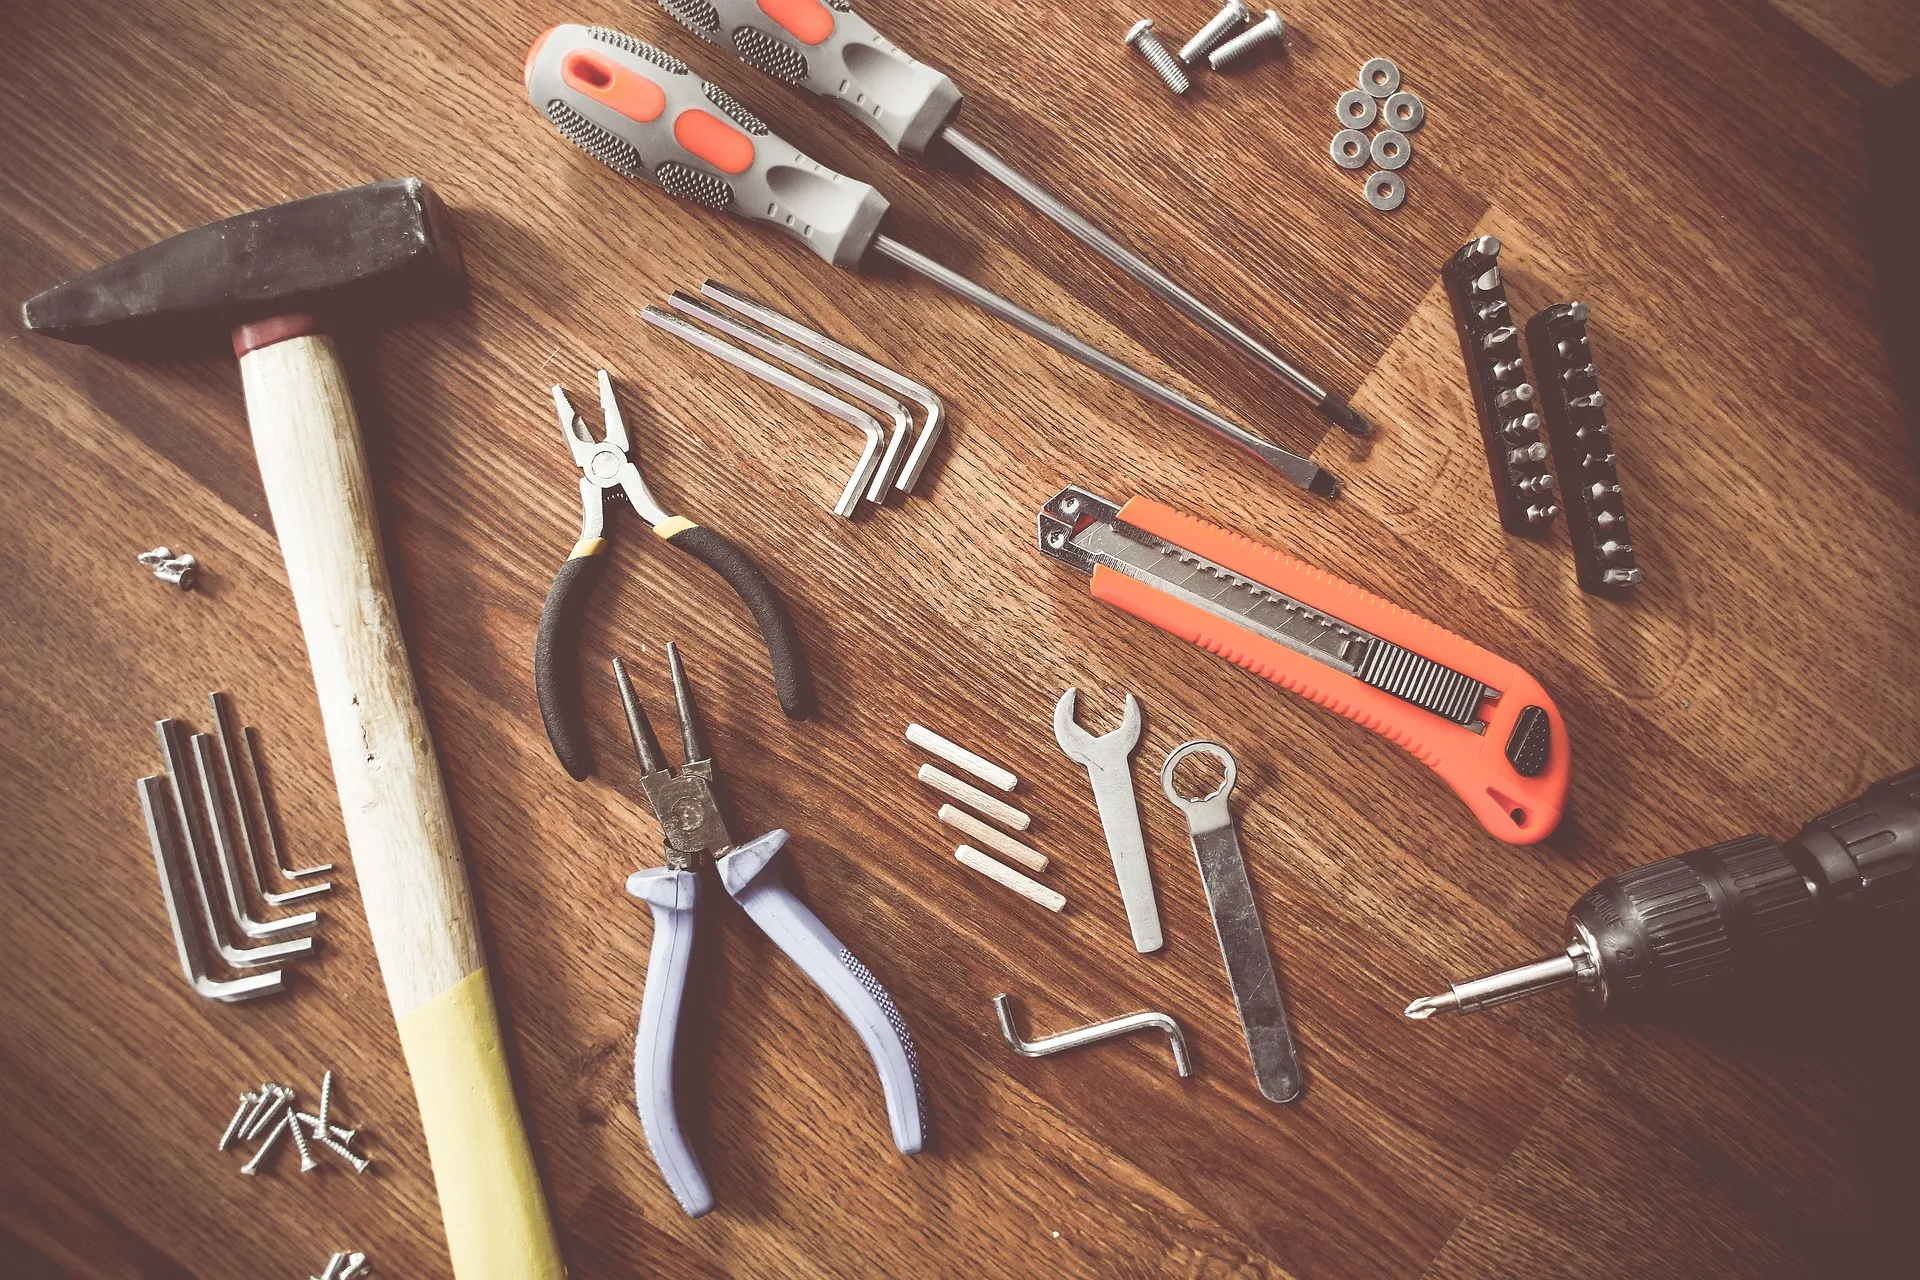 image of an assortment of tools from spanners, drills, knives, wire cutters, screwdrivers, hammers and washers